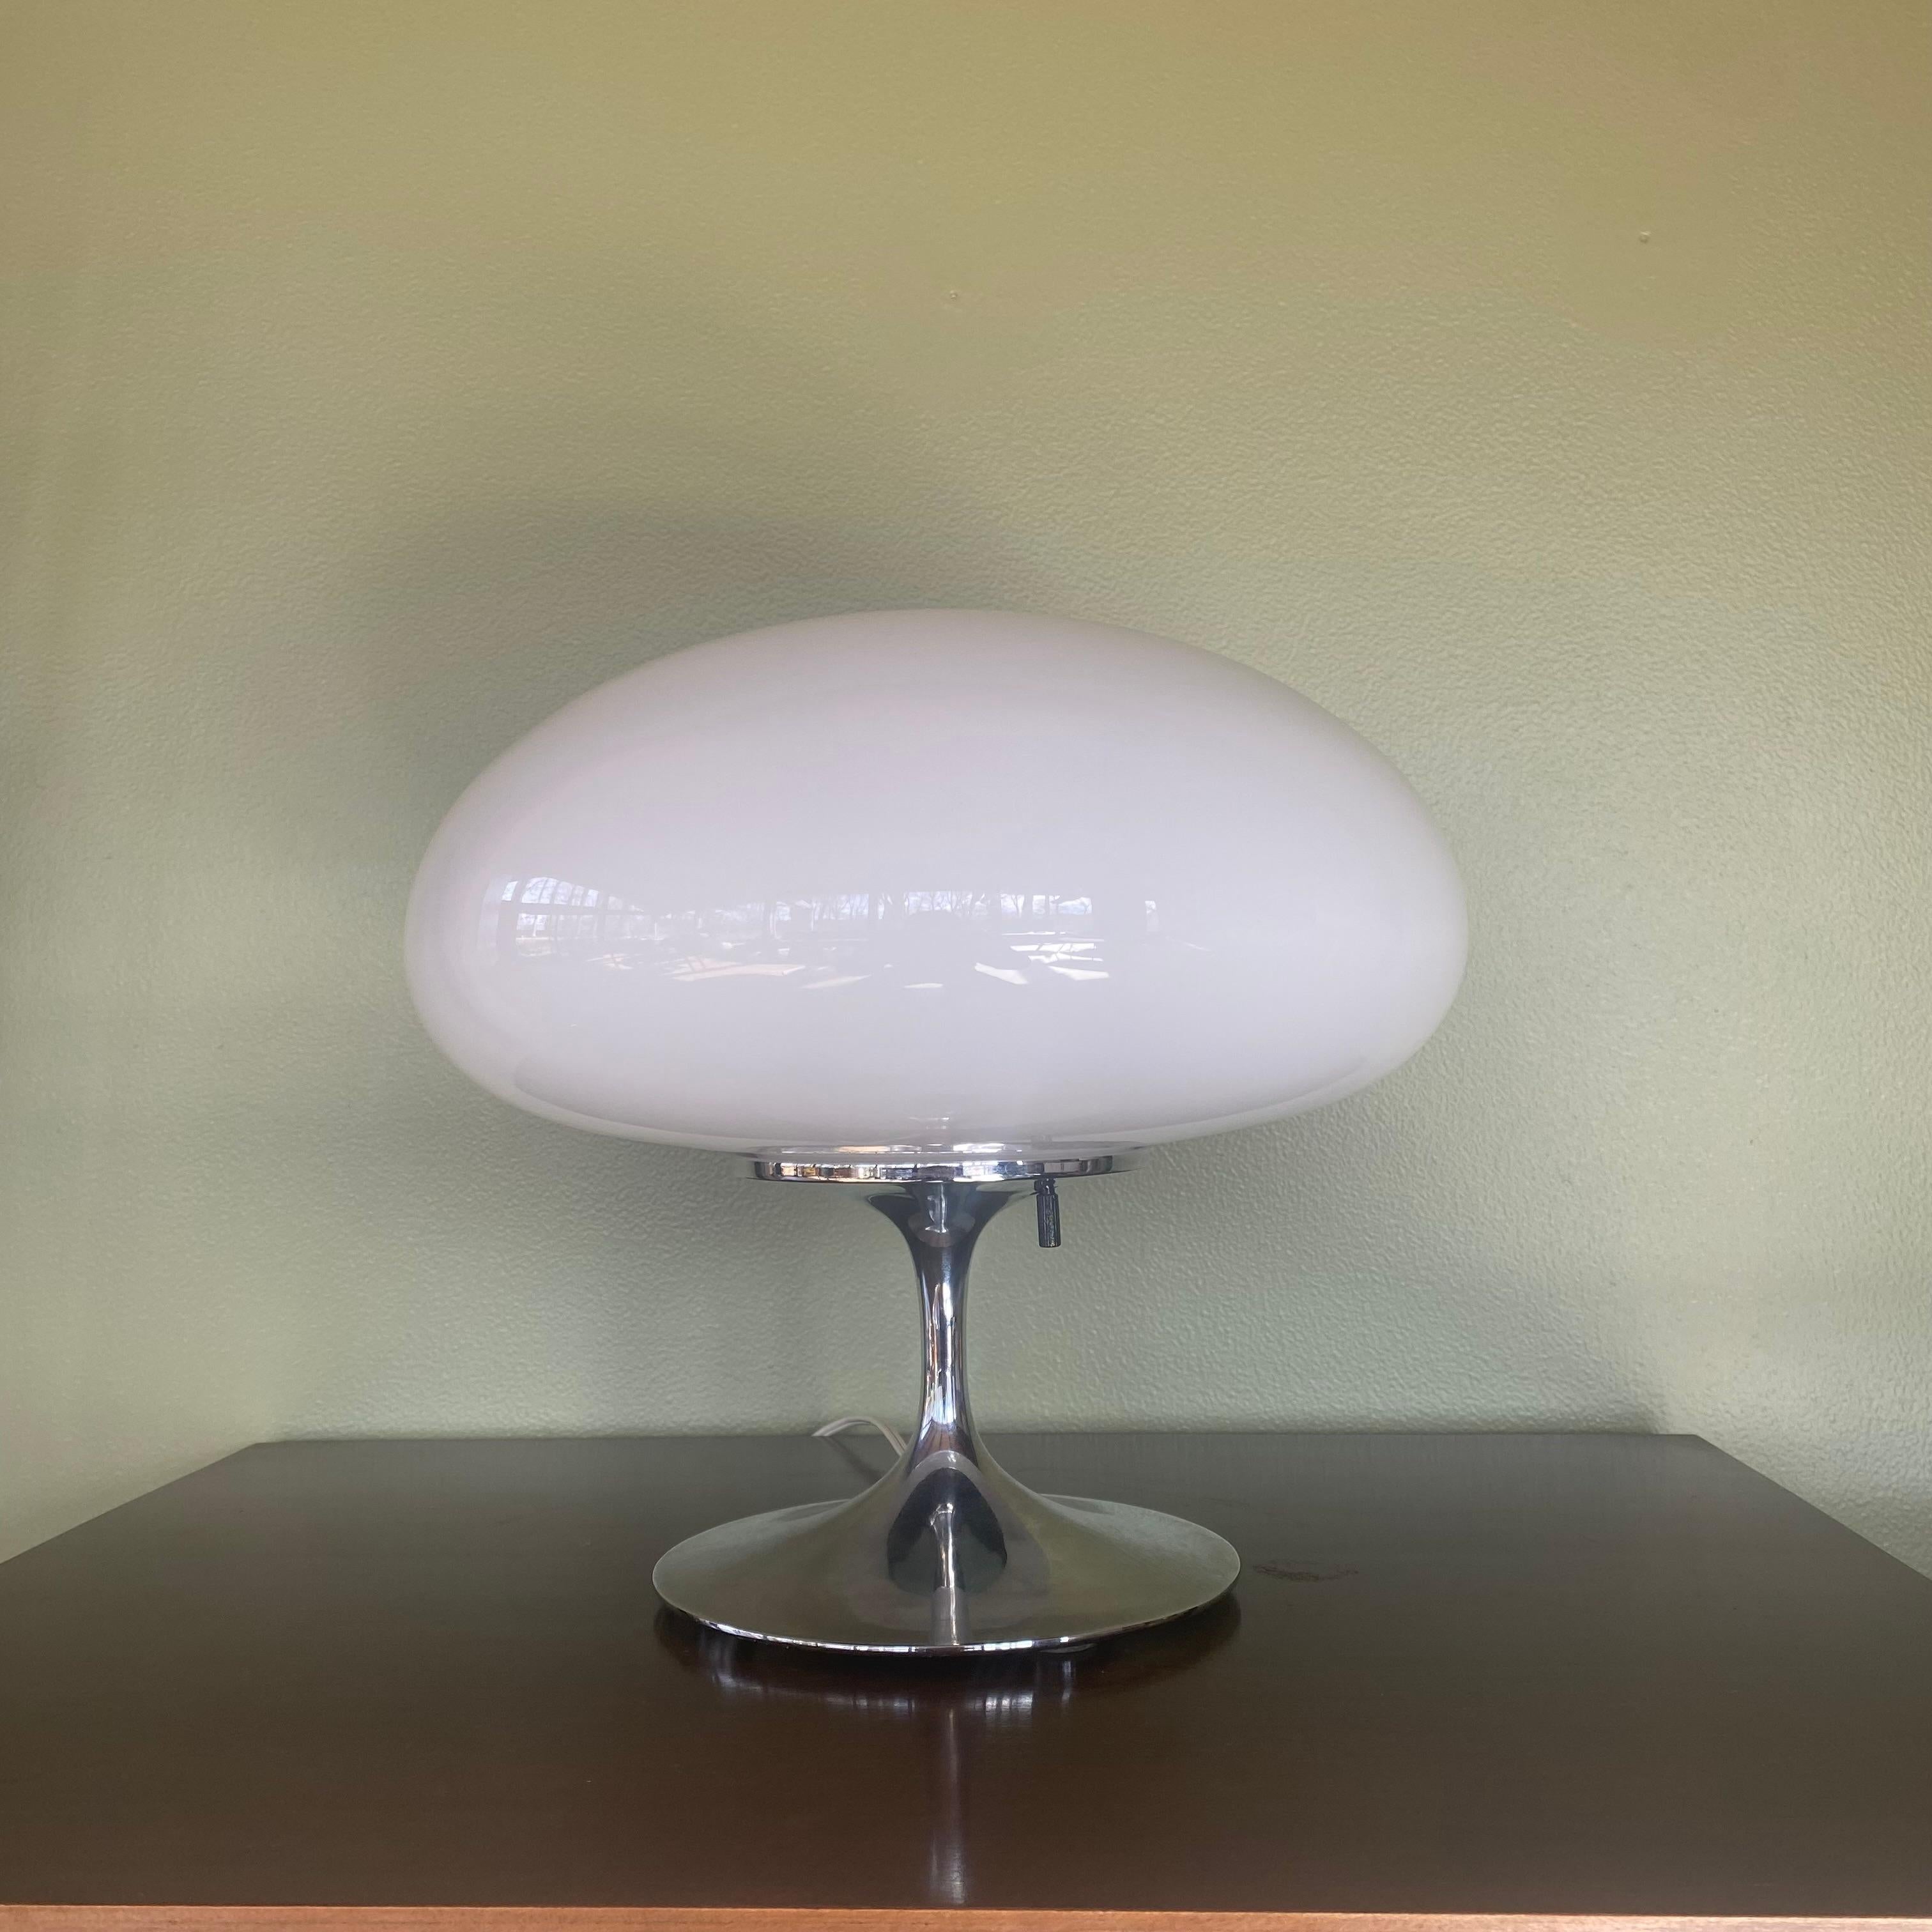 American Chrome and Mushroom Glass Stemlite Table Lamp by Bill Curry for Design Line